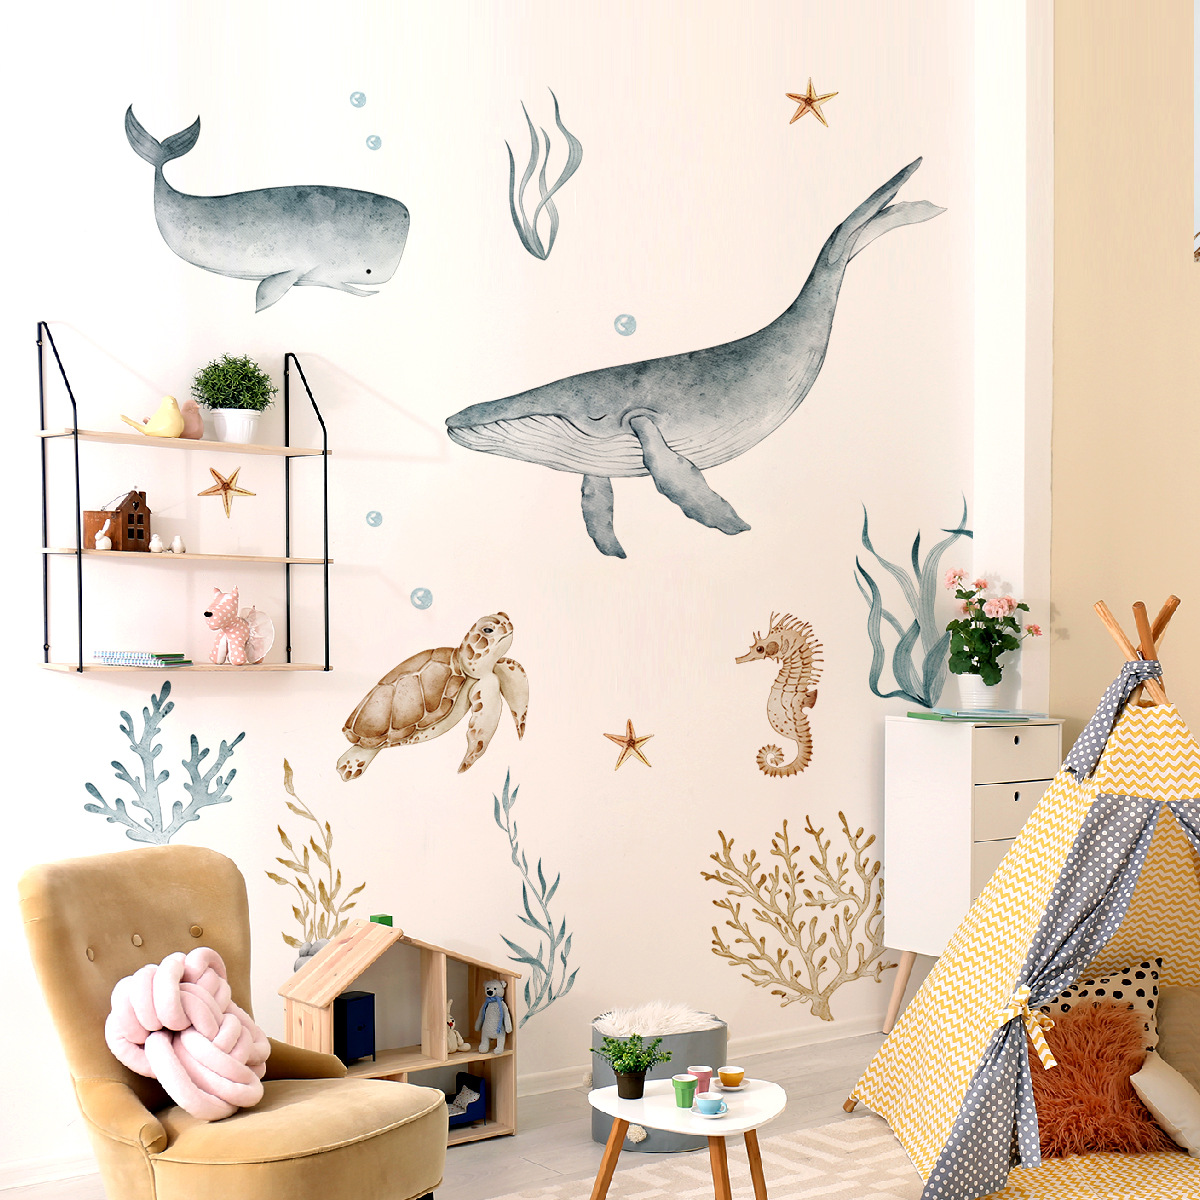 Nursery Wall Stickers Cute Fish 3D Wall Decal for Children’s Room